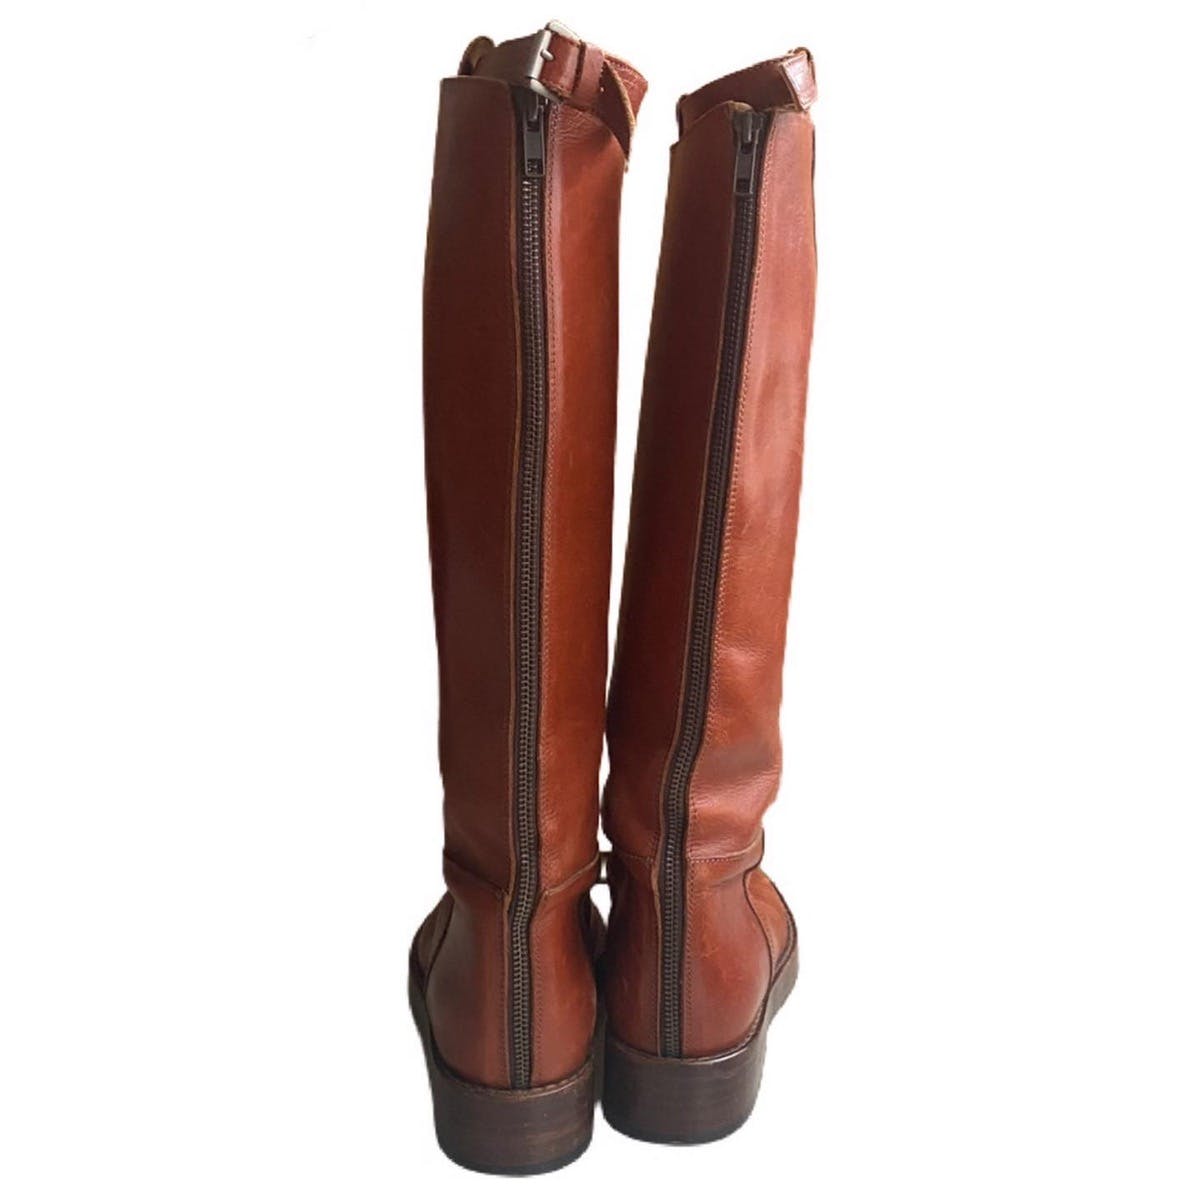 FW04 Runway Riding Boots - 4